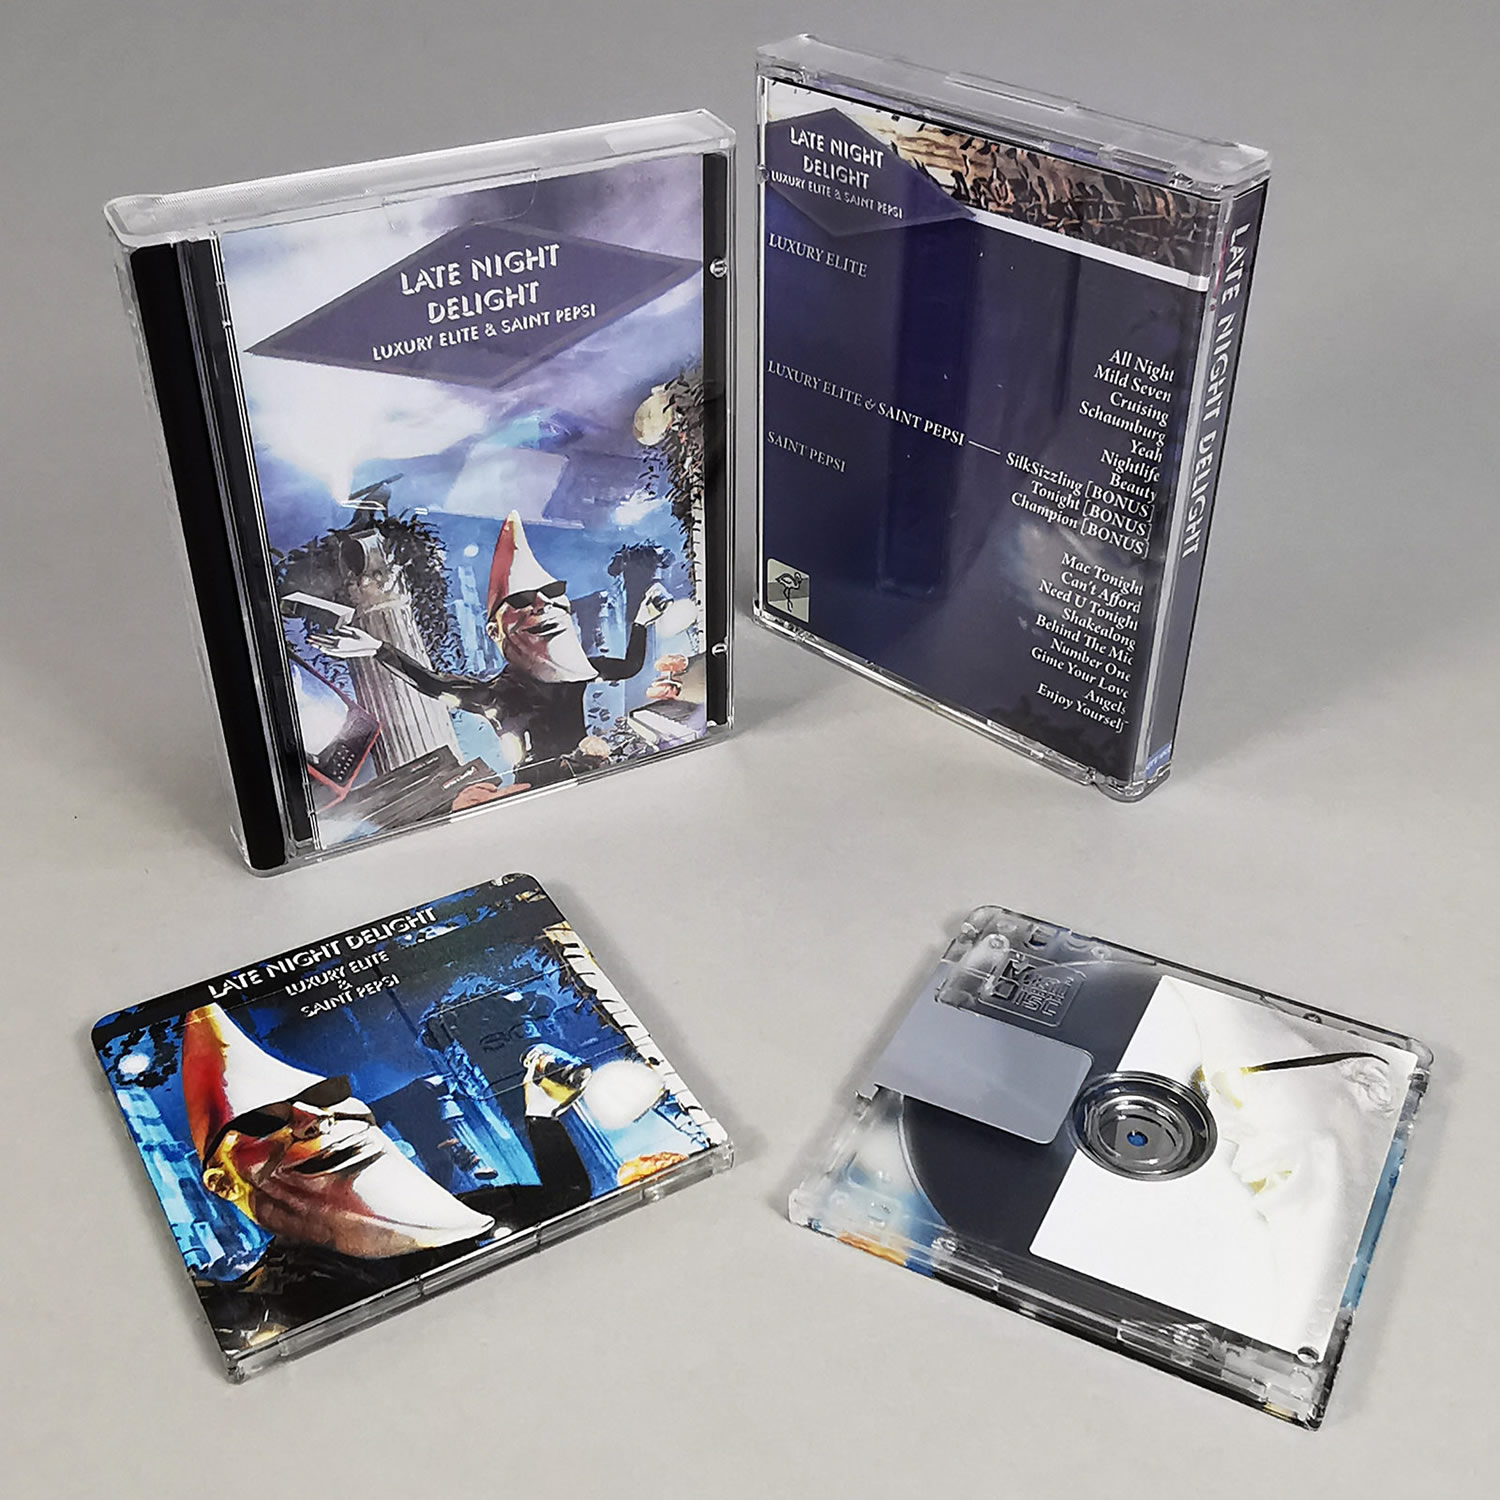 MiniDisc duplication and production in full size cases - Band CDs